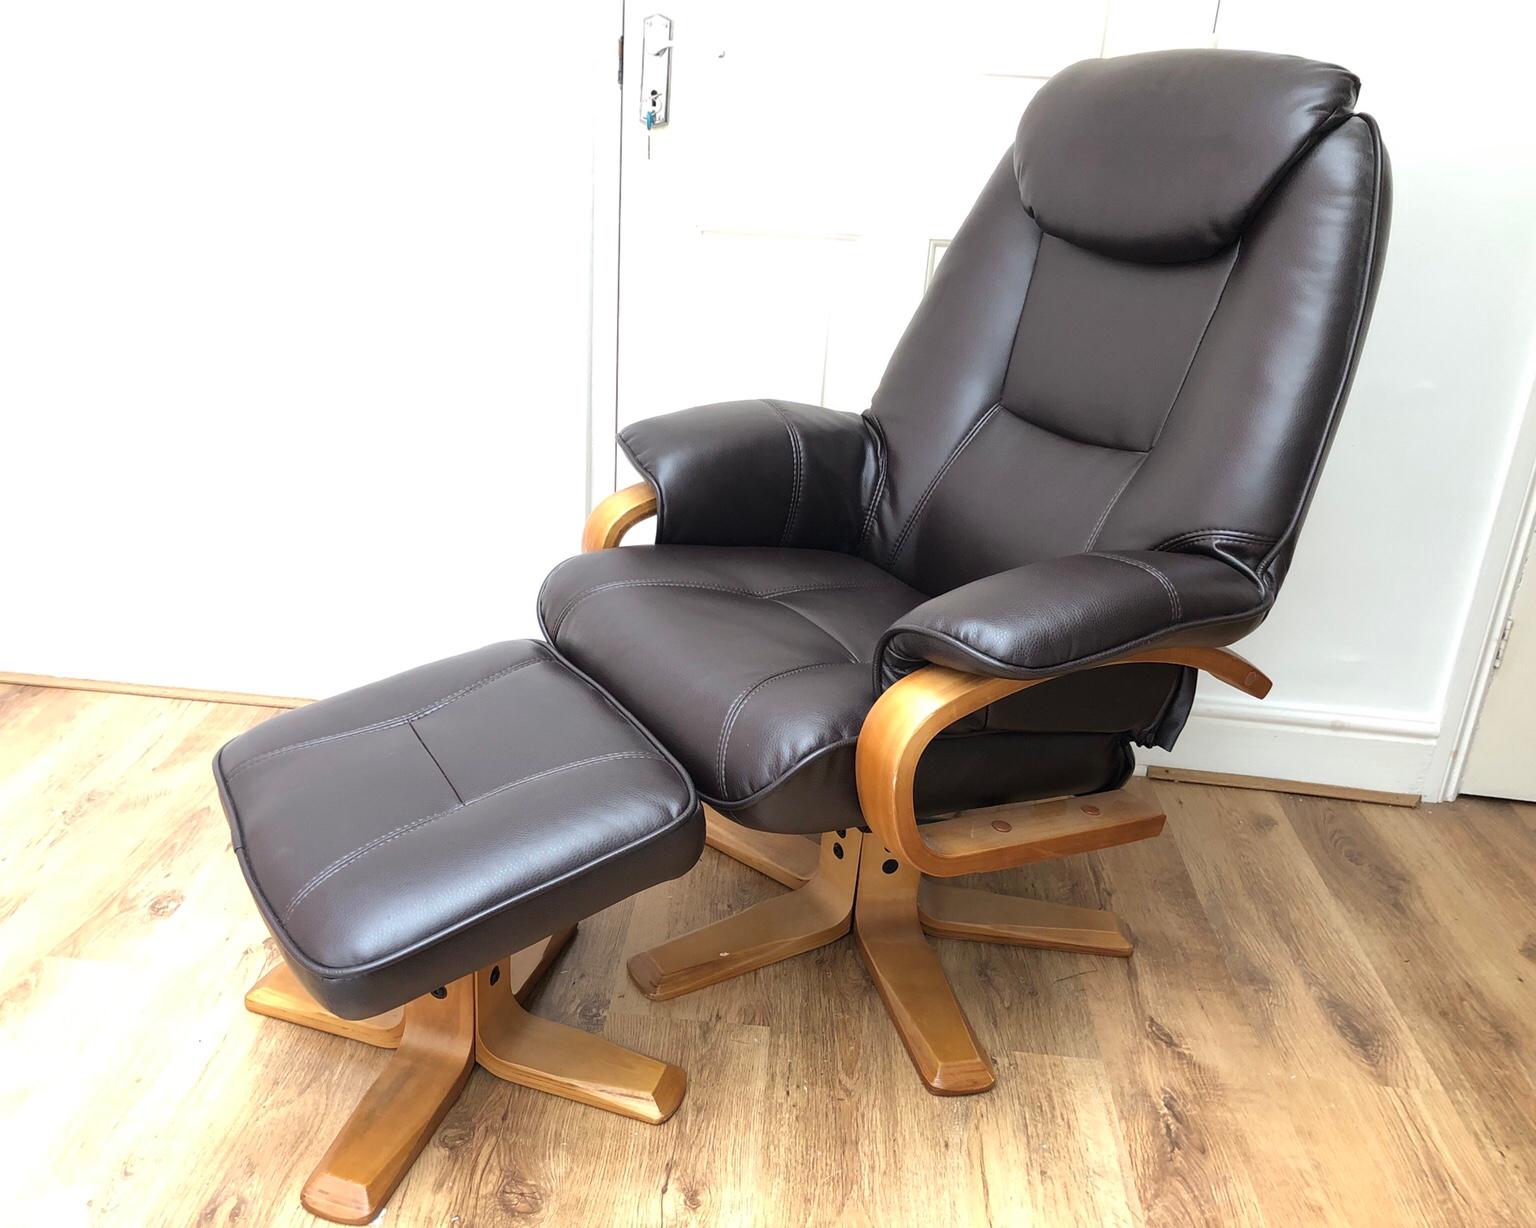 Leather Recliner Chair With Footstool In Northampton For 175 00